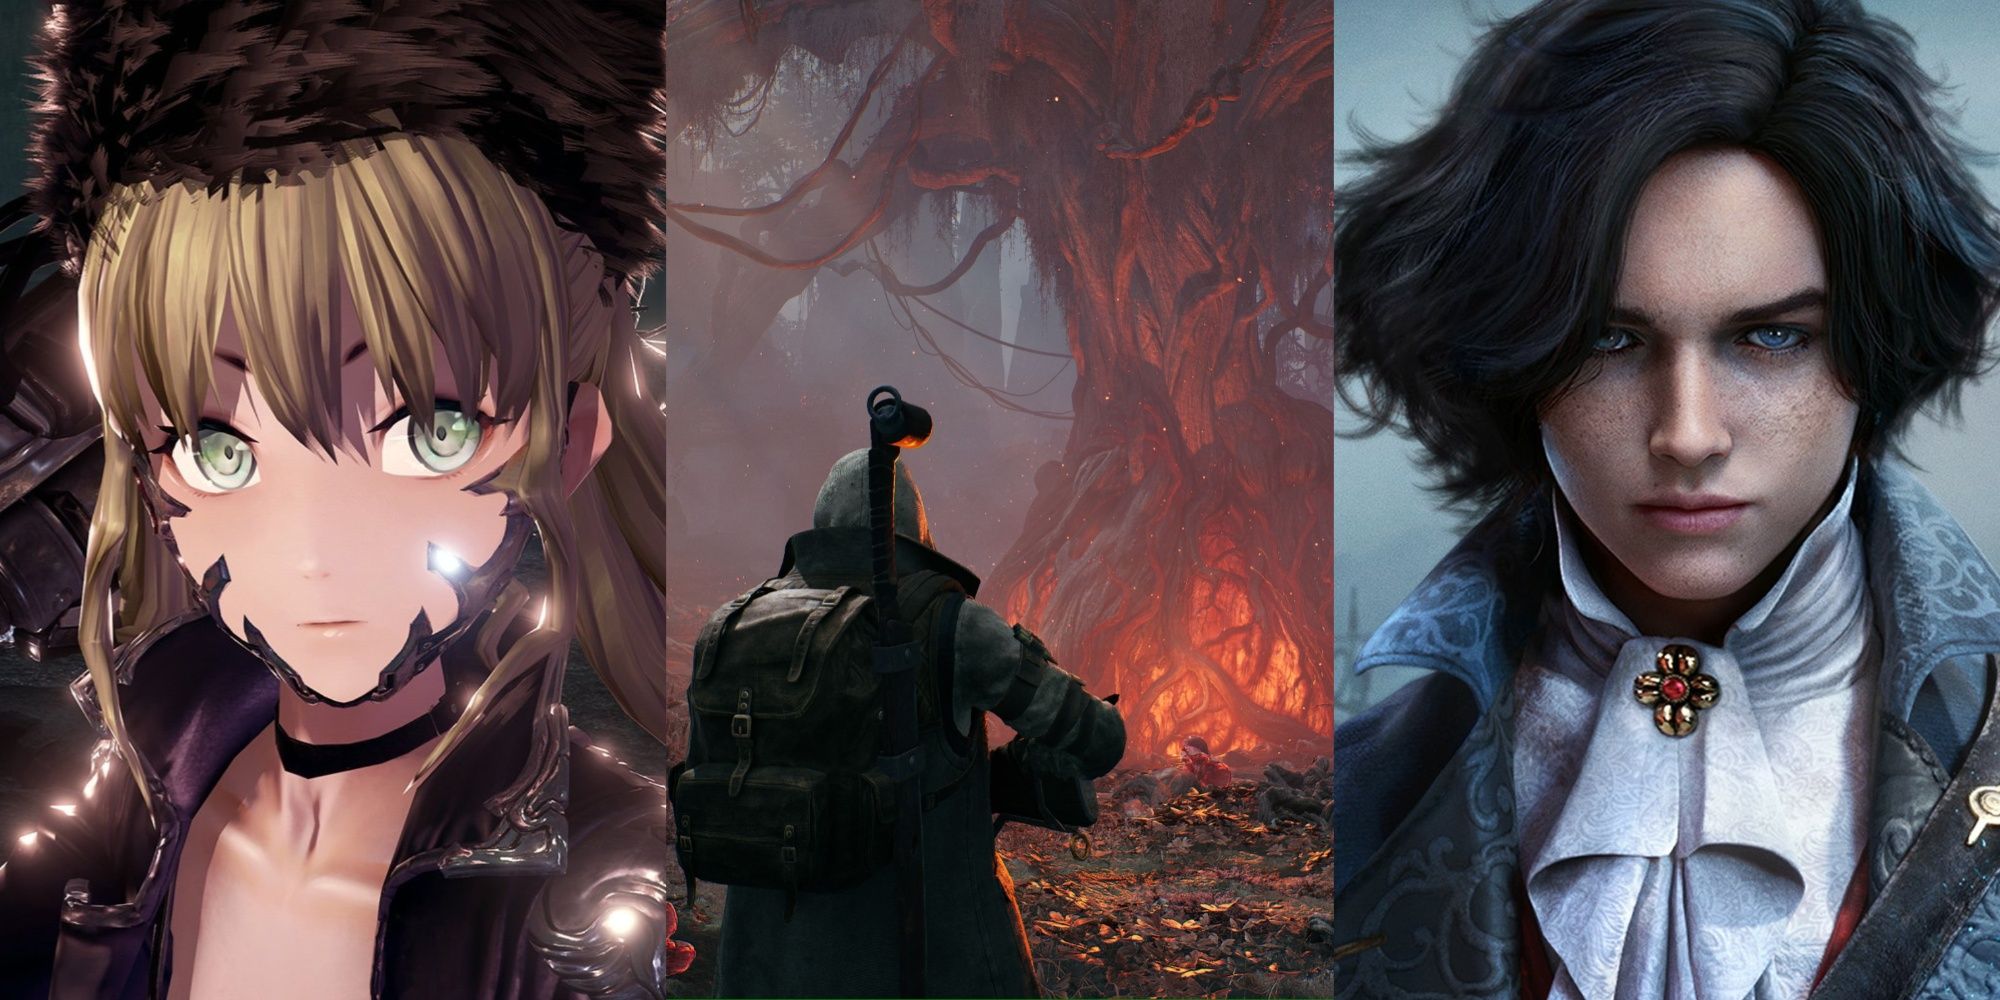 15 Best Soulslike Games For Gamers On A Budget